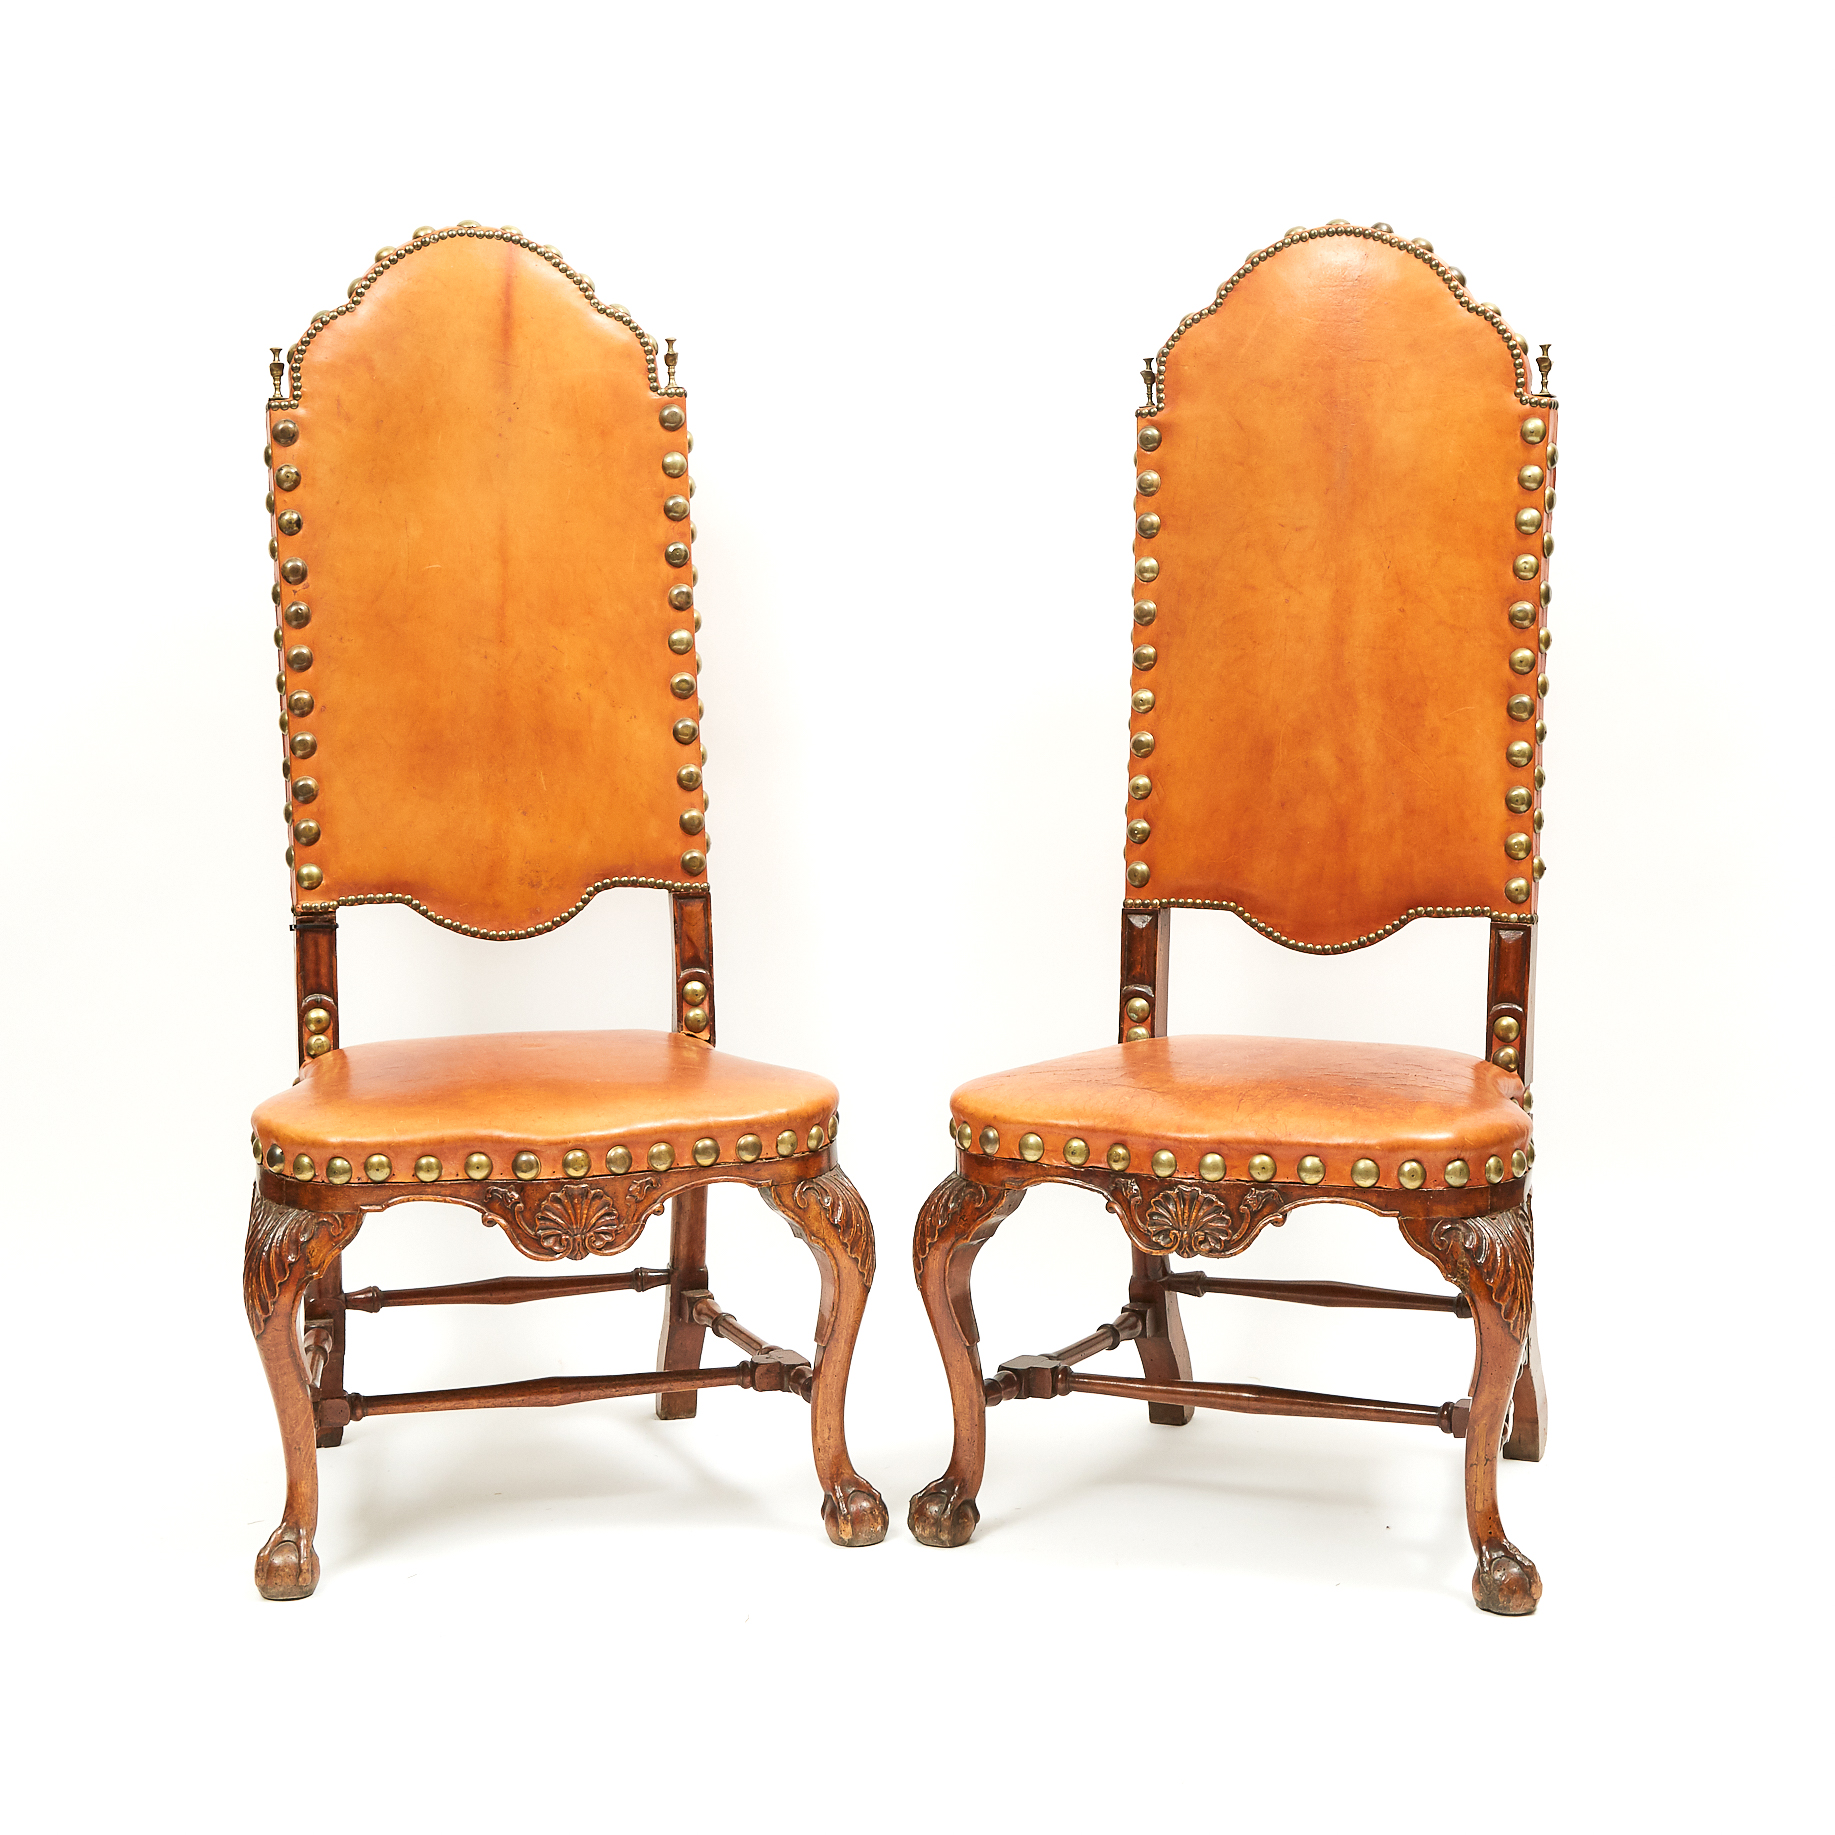 Pair of George I Style Walnut Side Chairs, 19th century